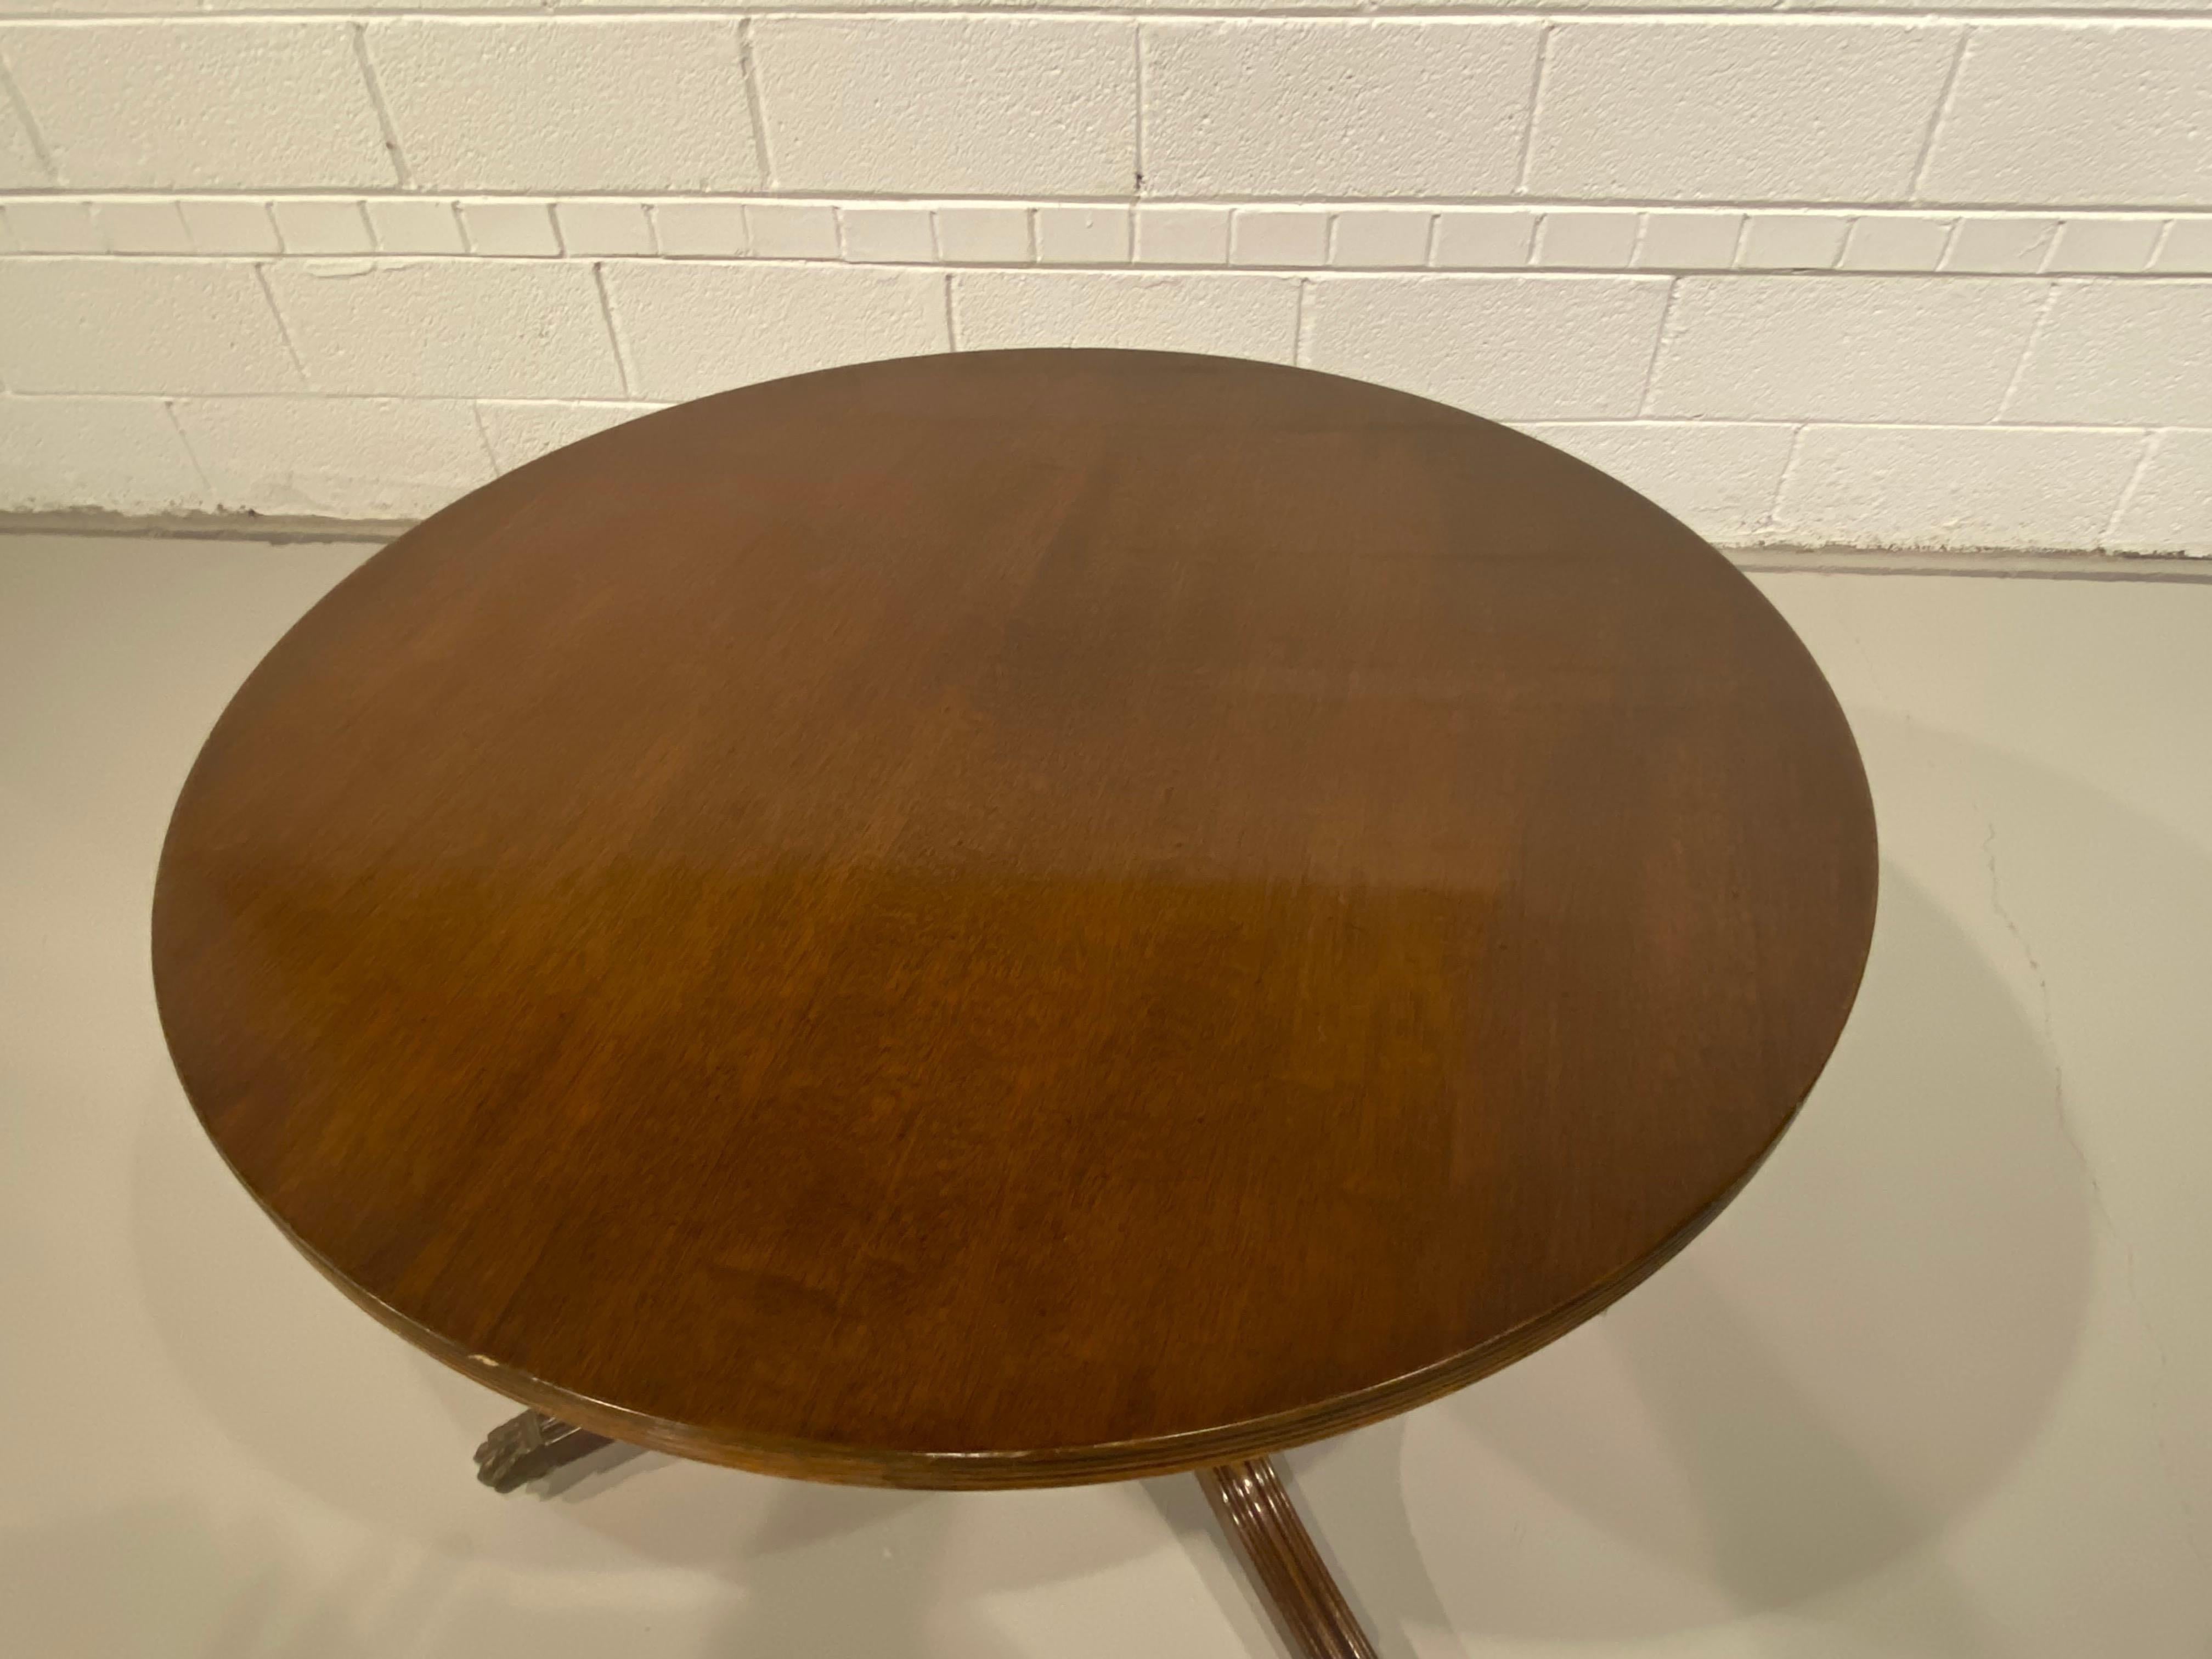 A round single pedestal Regency style mahogany pedestal coffee table or cocktail table with a reeded edge, made in England. The base is supported on the traditional brass claw toe caps with brass casters.